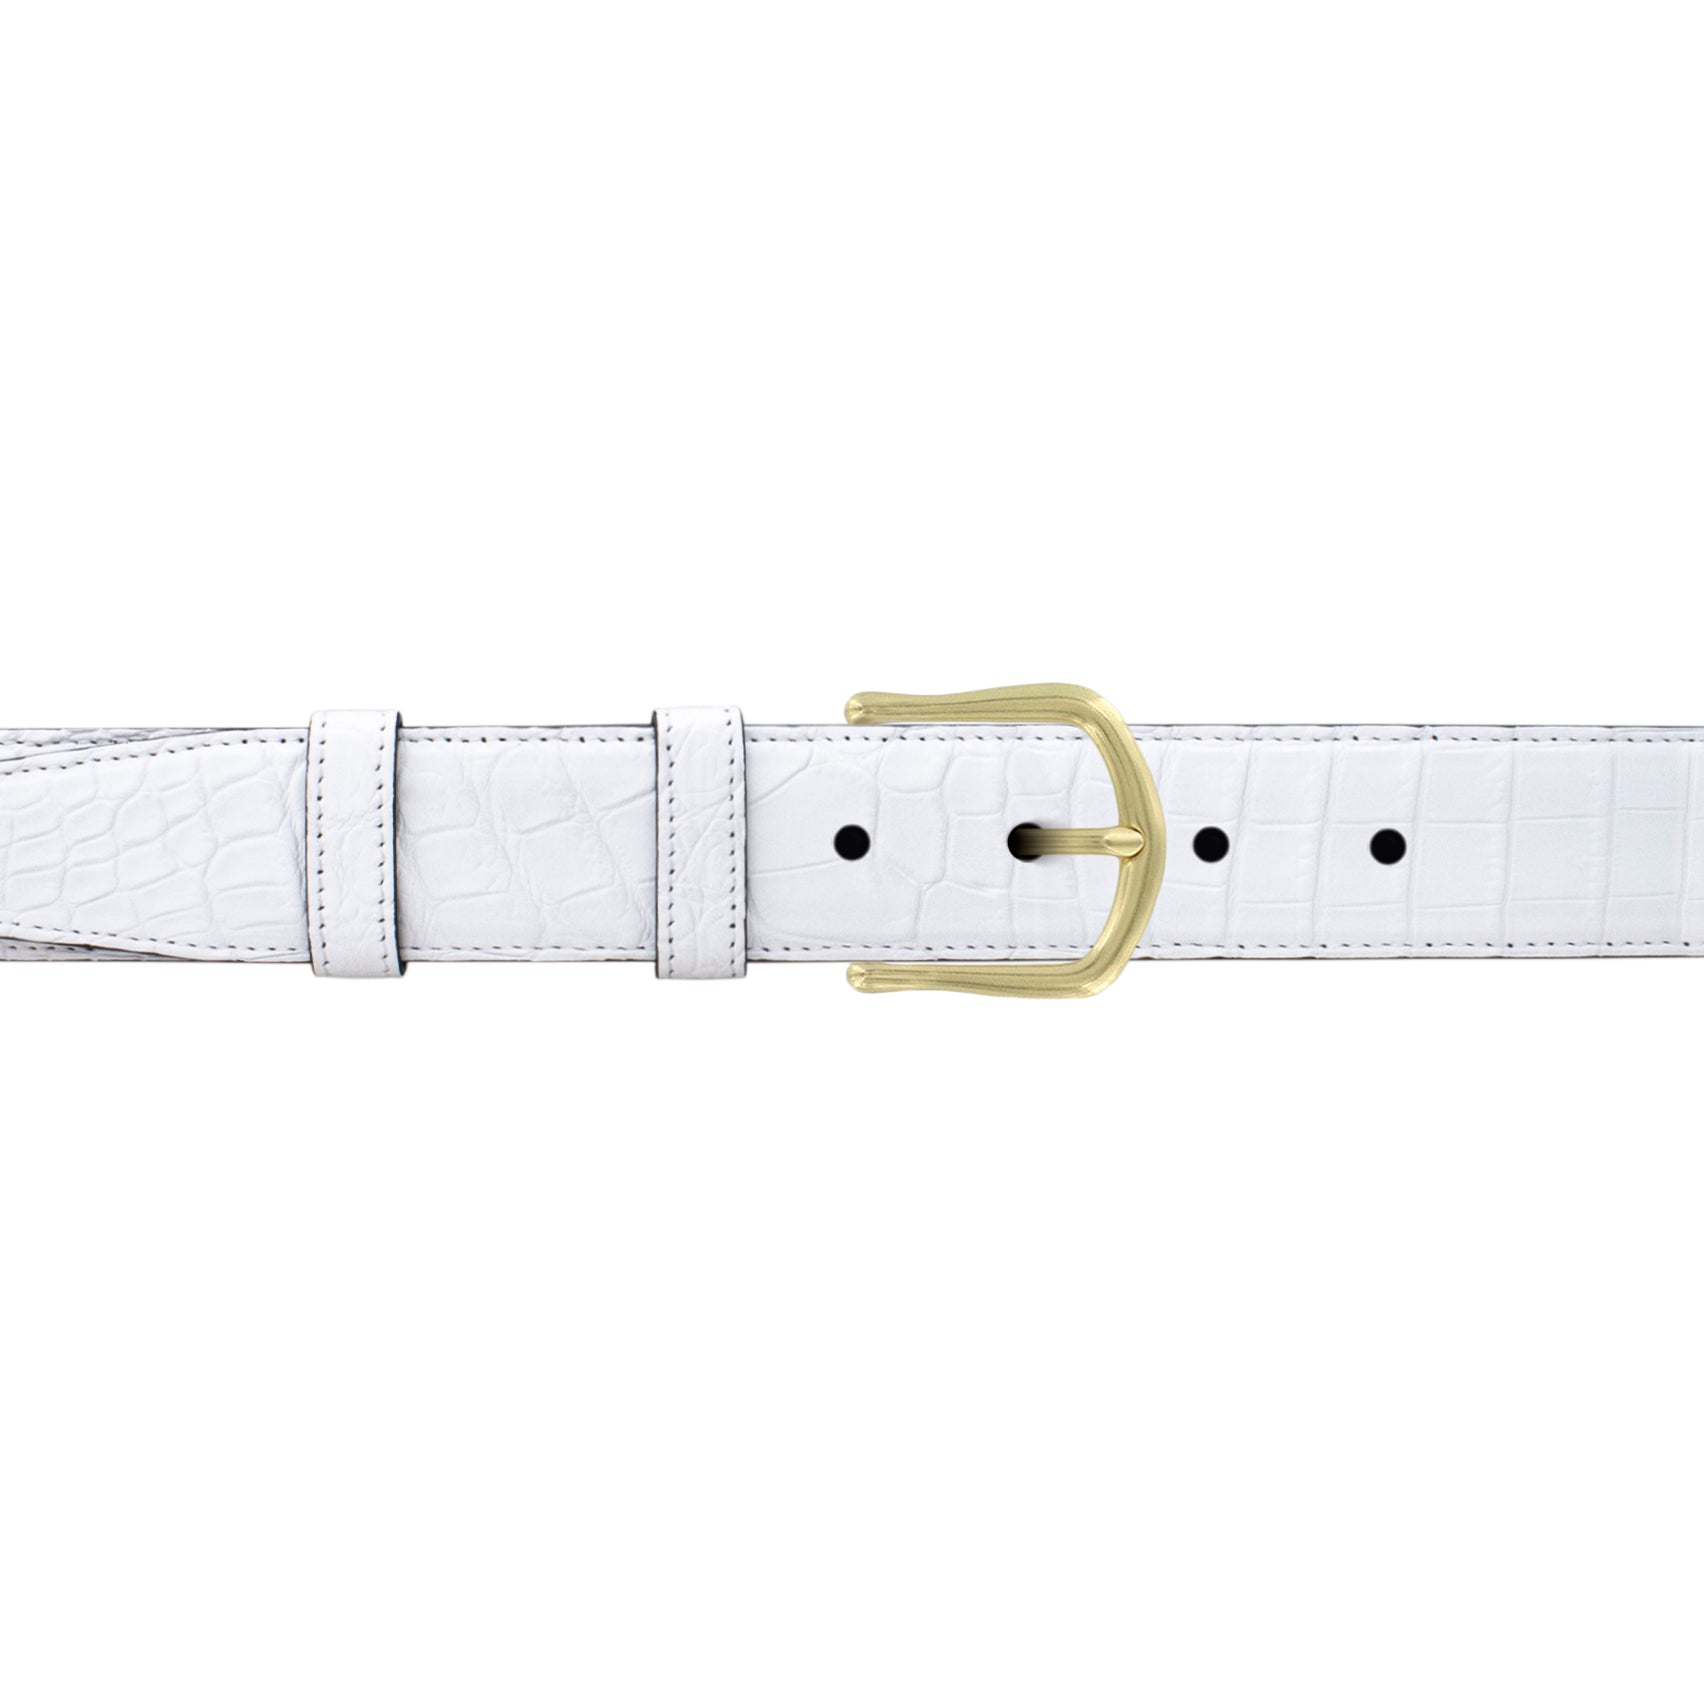 1 1/4" White Classic Belt with Derby Cocktail Buckle in Brass